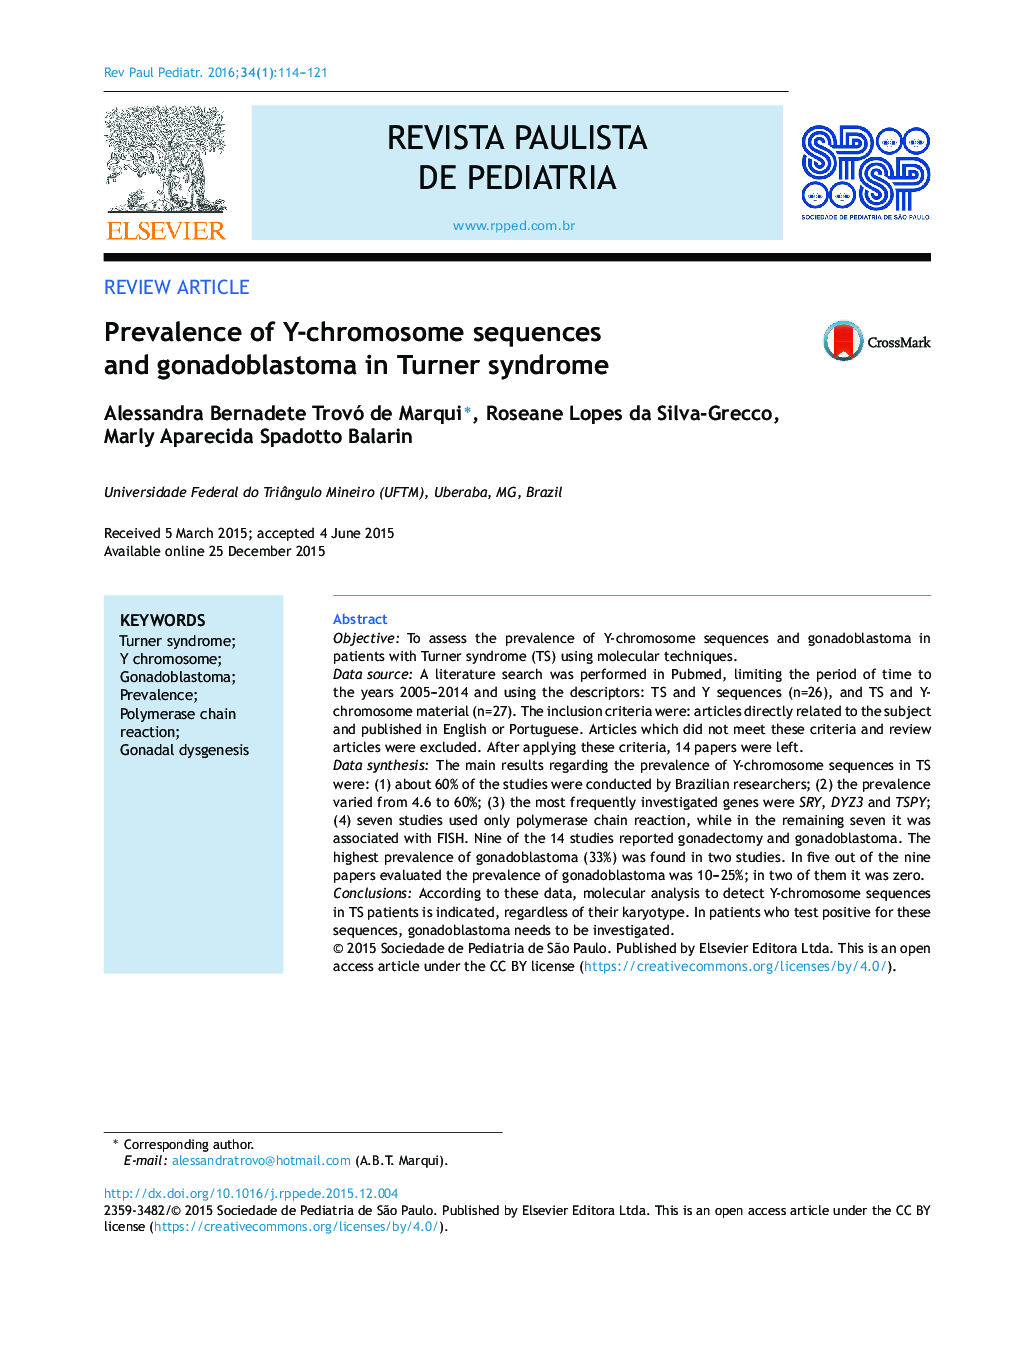 Prevalence of Y-chromosome sequences and gonadoblastoma in Turner syndrome